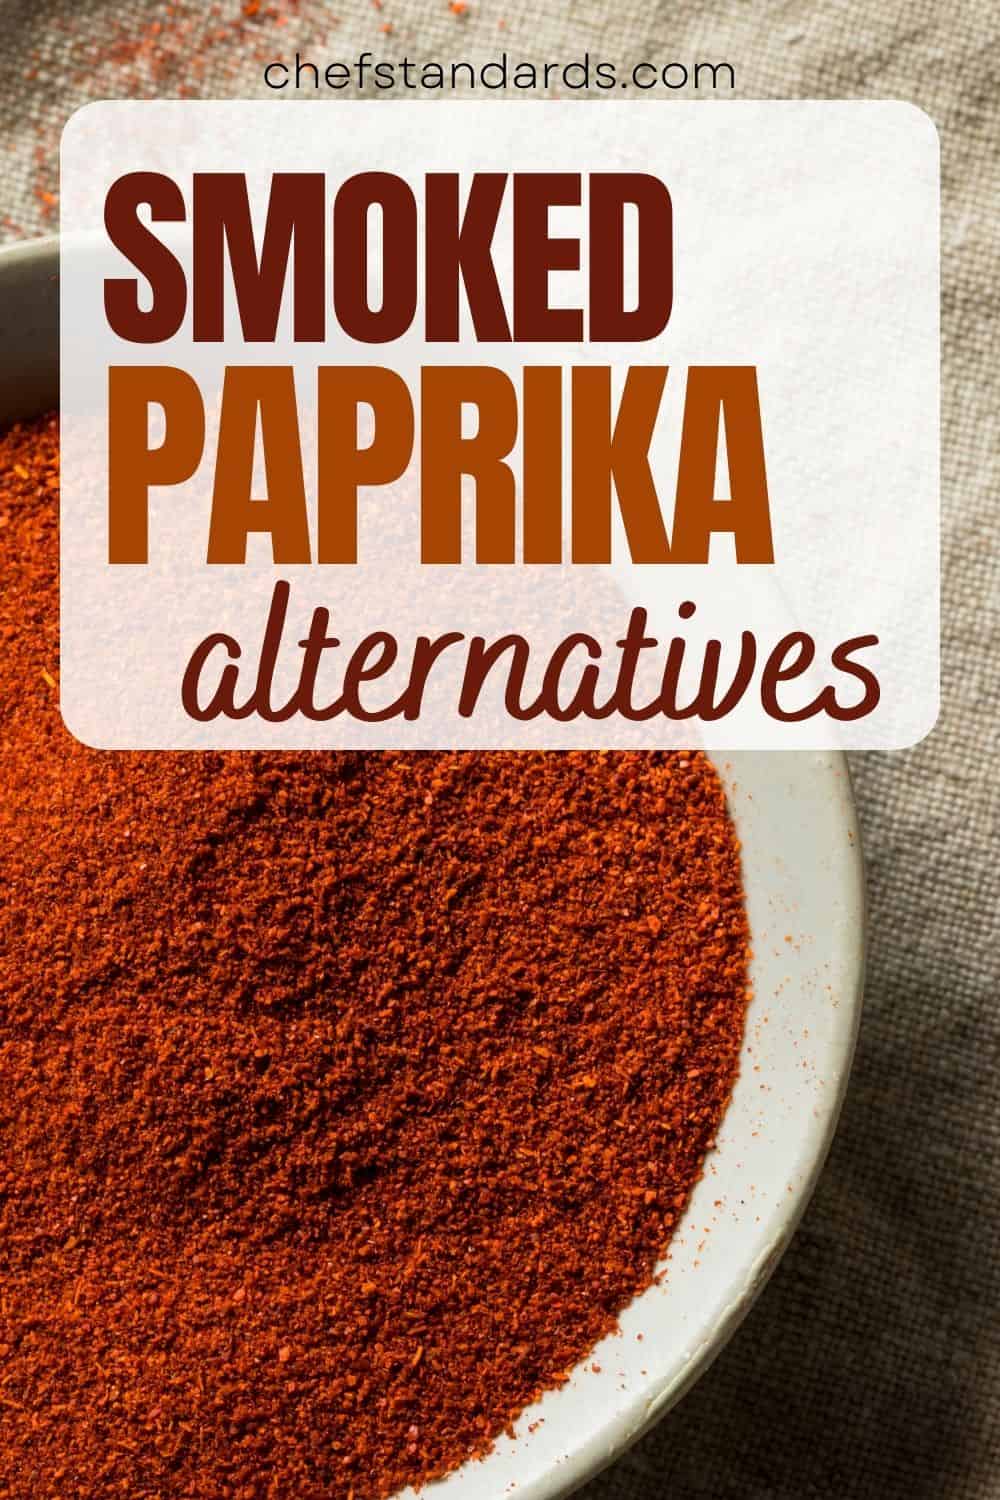 Top 5 Smoked Paprika Substitutes That Imitate Its Smoky Flavor